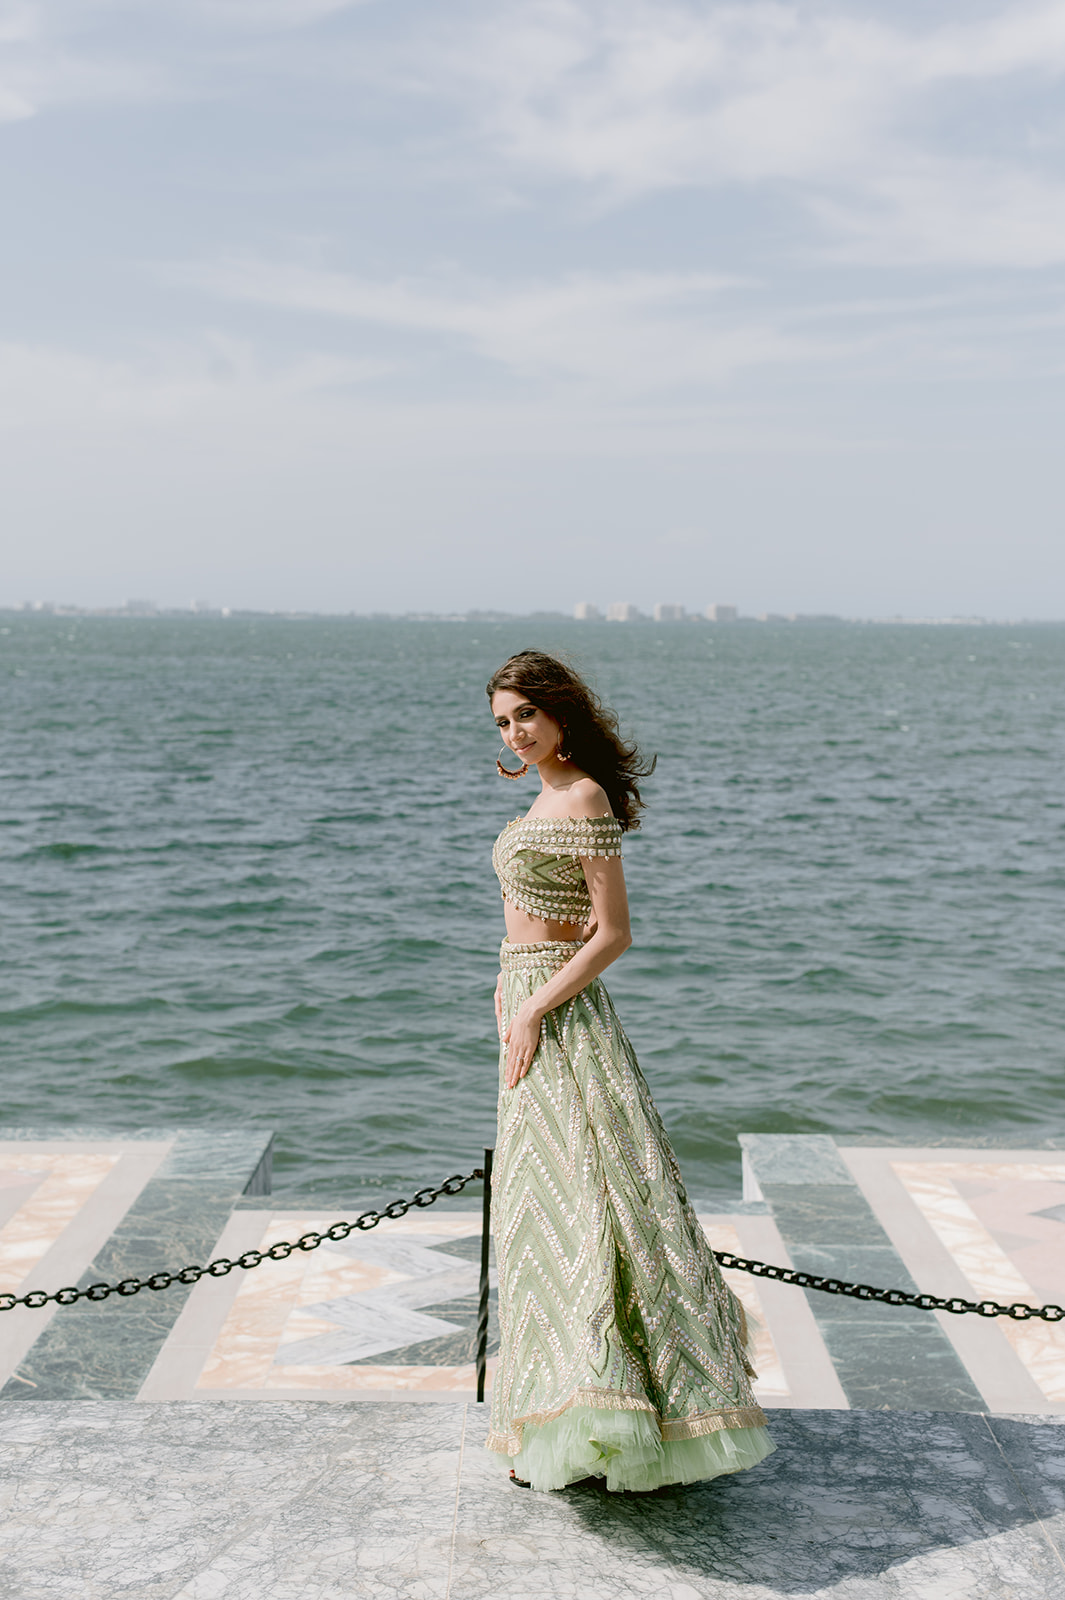 "Elegant and romantic Ringling Museum engagement shoot with stunning Indian couple"
